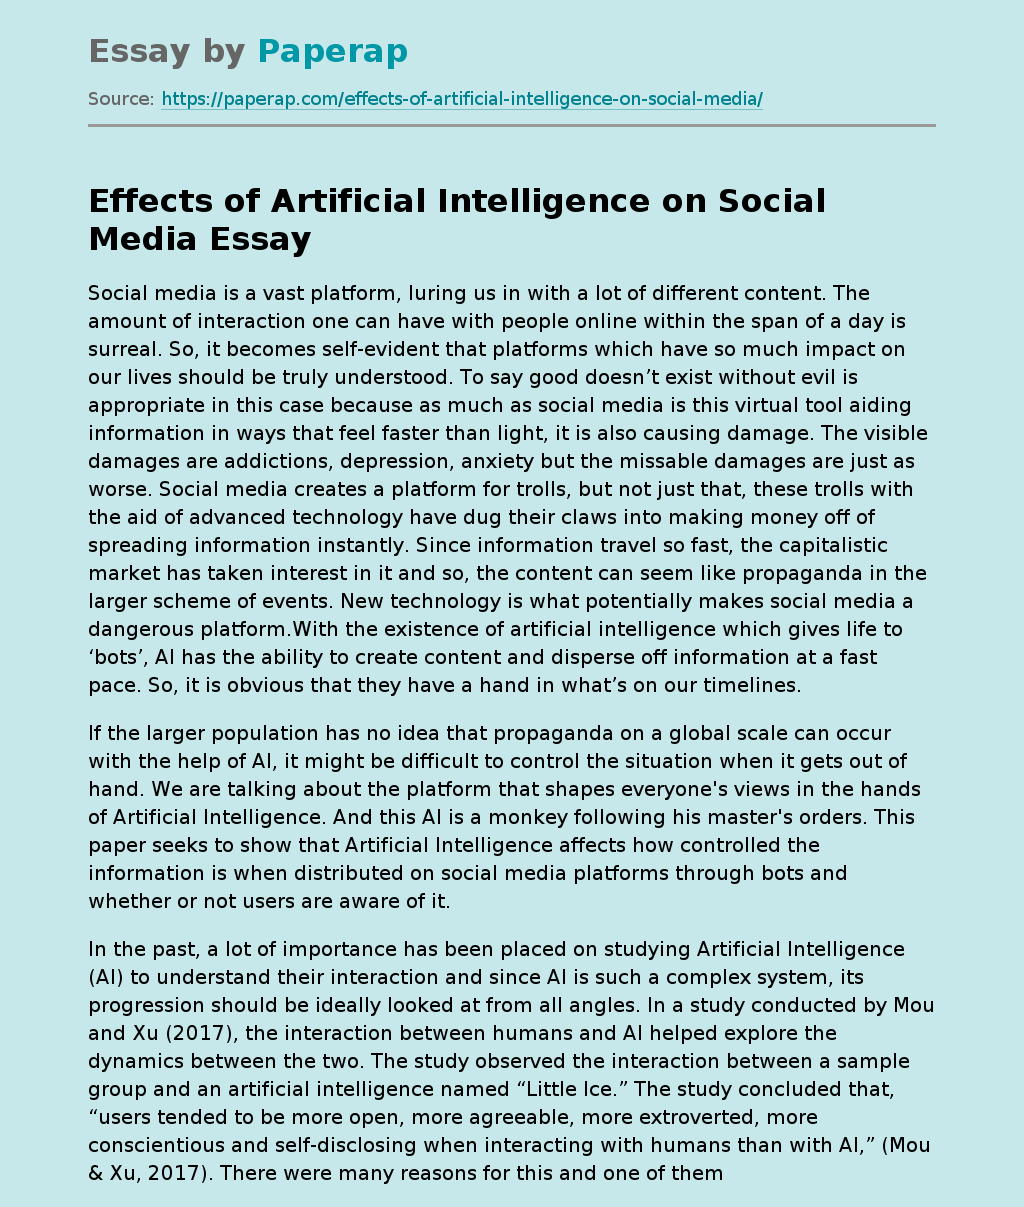 Effects of Artificial Intelligence on Social Media